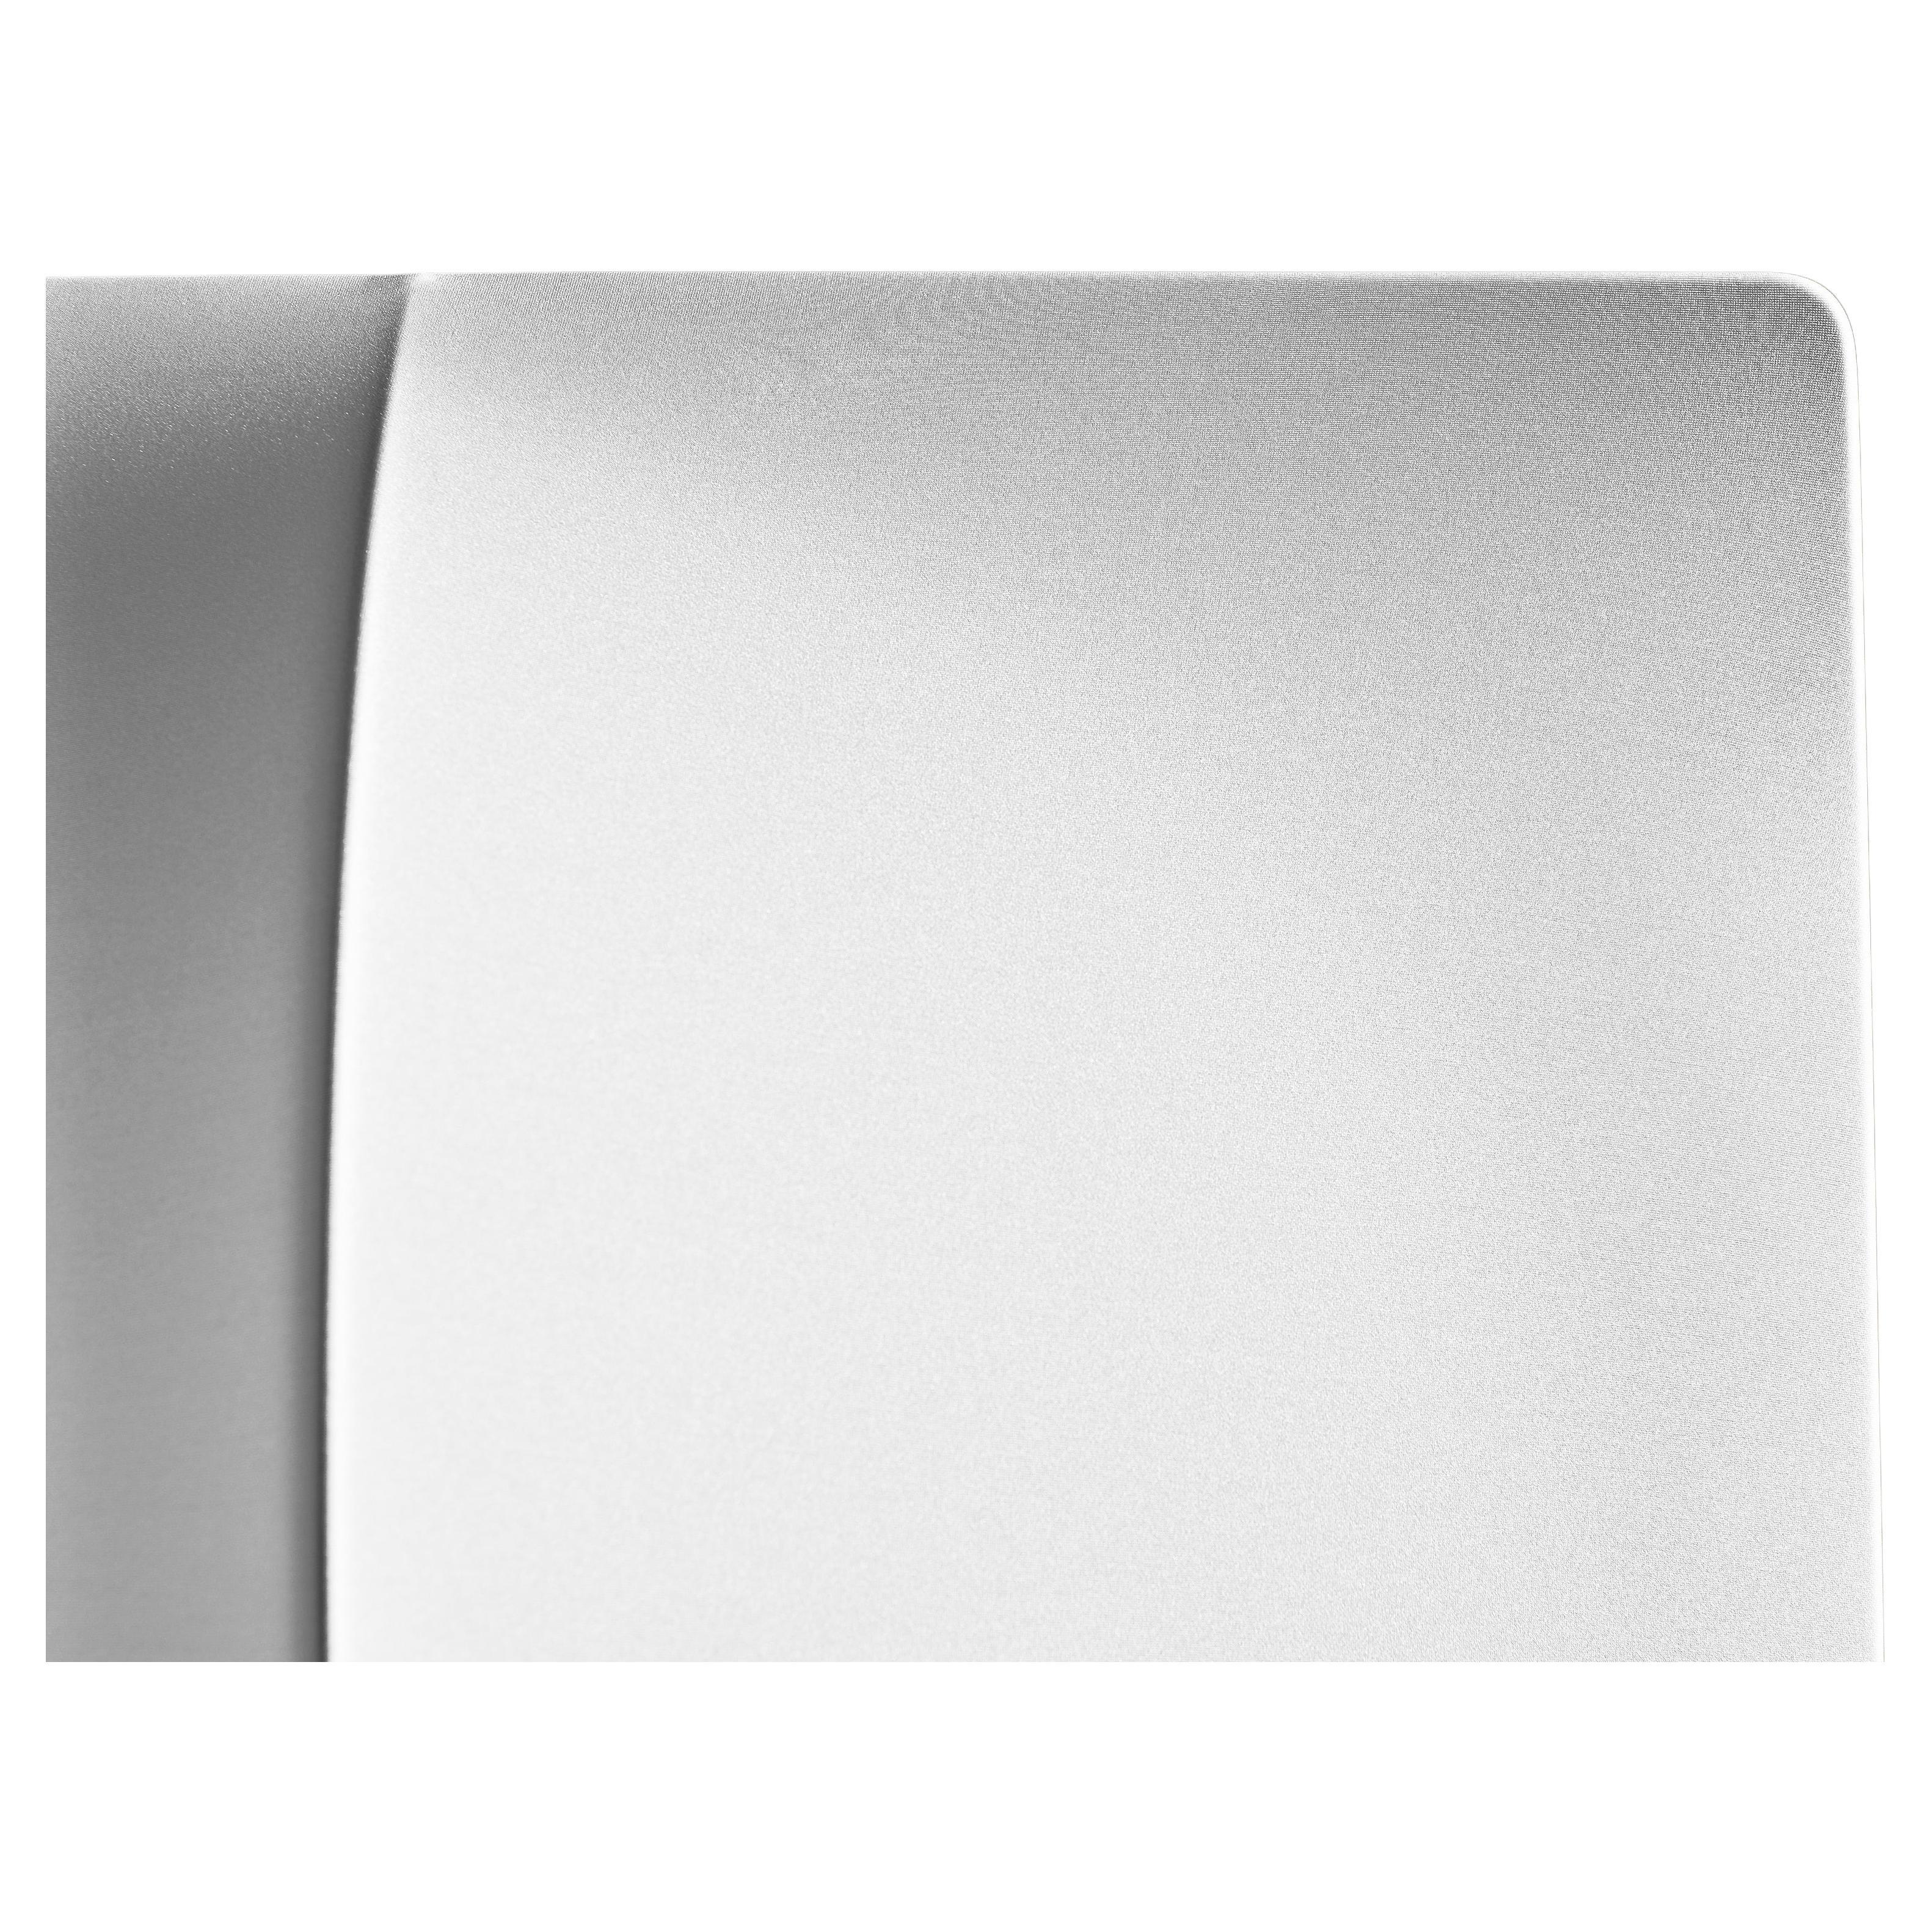 Axolight Large 140 Nelly Wall Lamp in White by Manuel & Vanessa Vivian For Sale